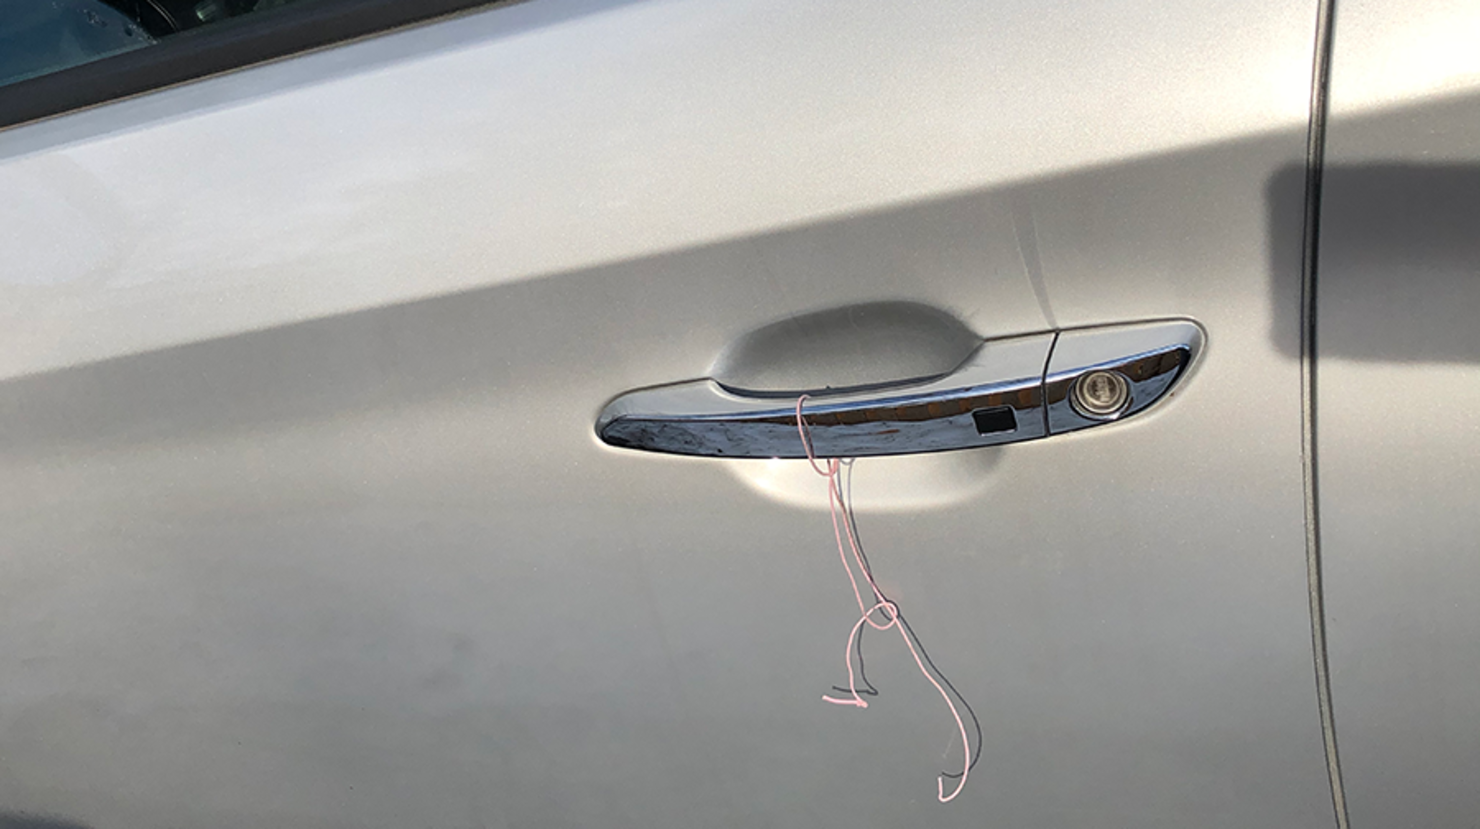 If You See A Wire Tied To Your Car Door Handle, Do Not Call The Police